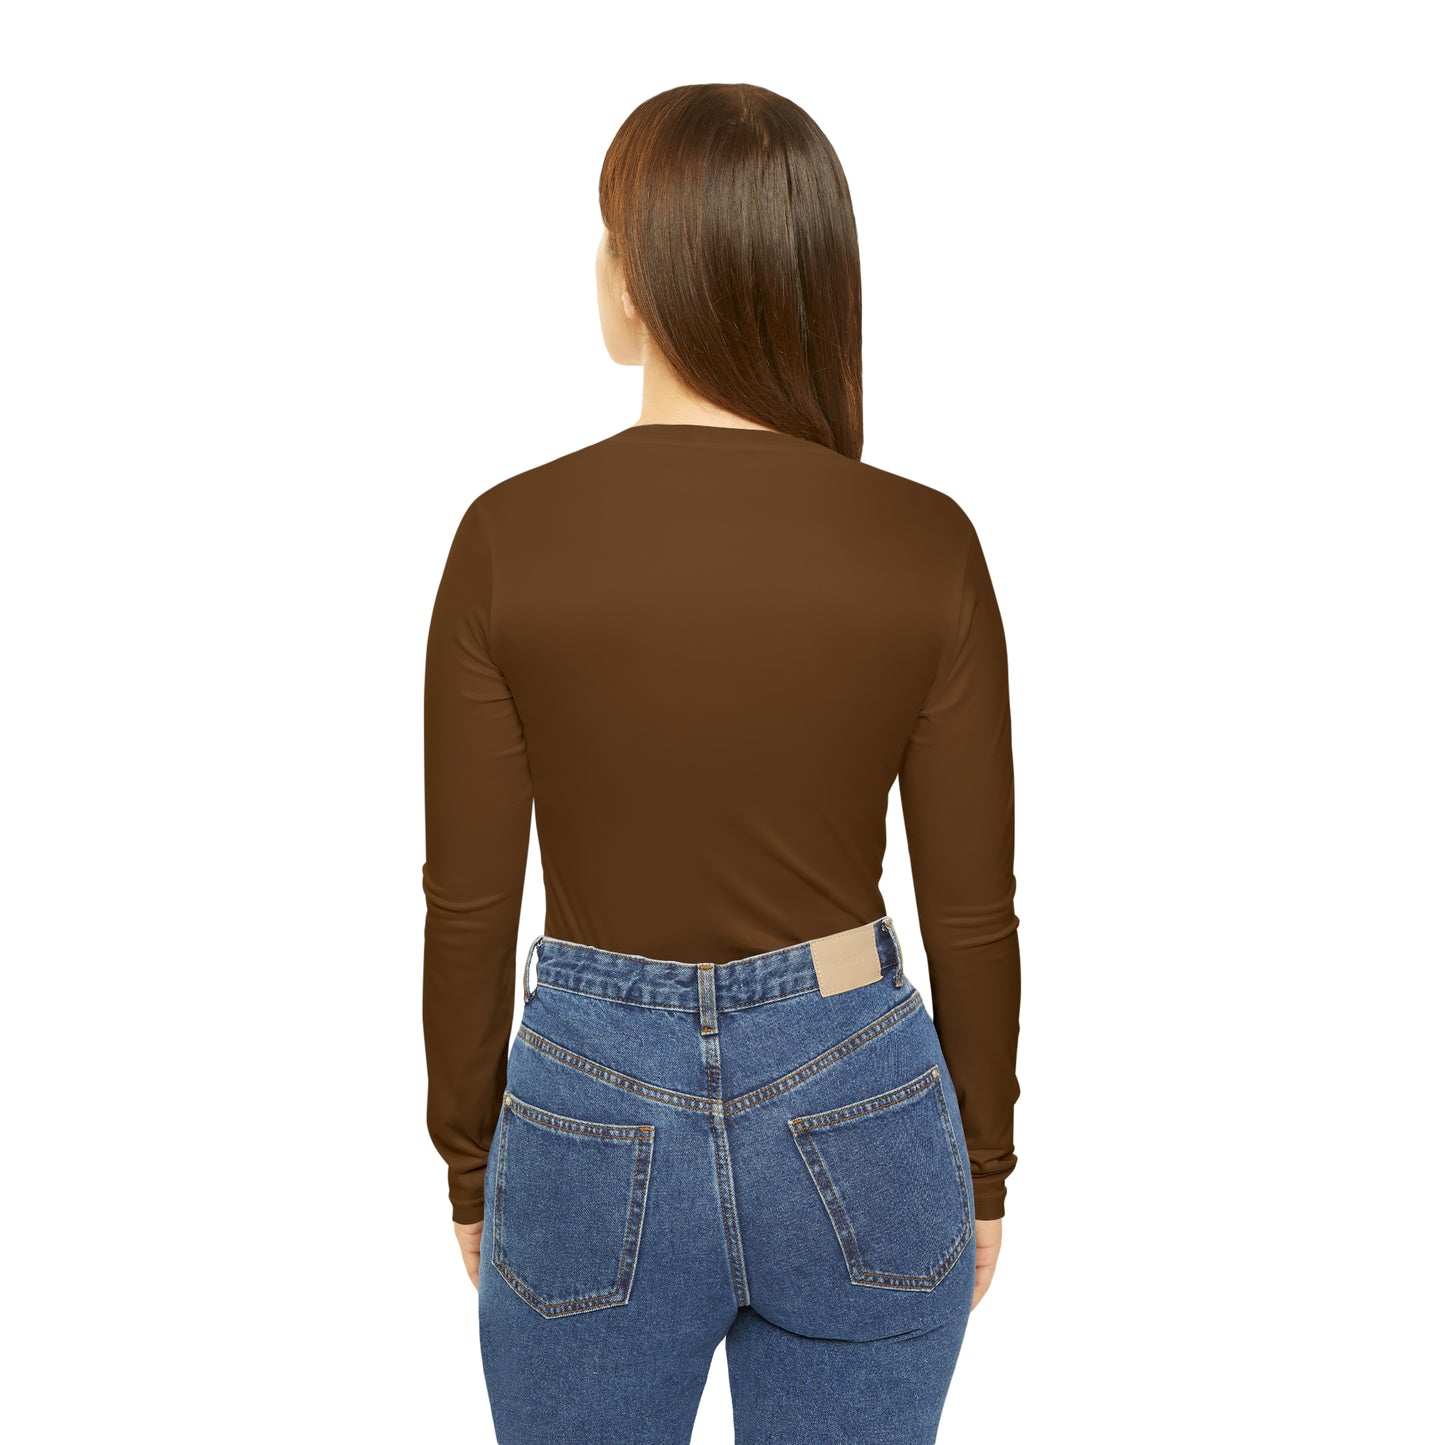 A Piece Of Crap Chic Long Sleeve V-Neck Tee - Brown